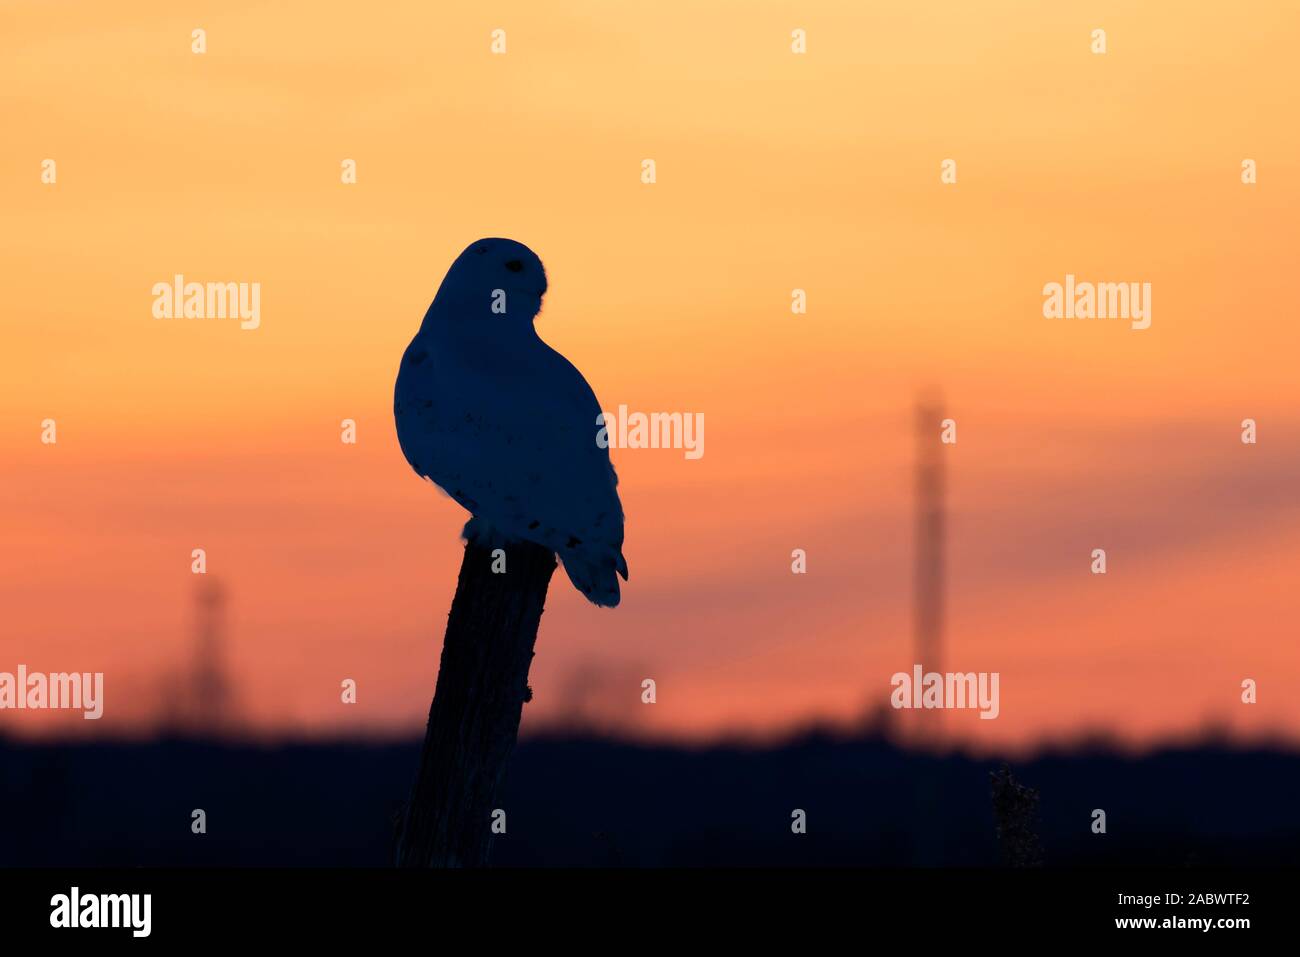 Snowy owl hunting at sunset Stock Photo